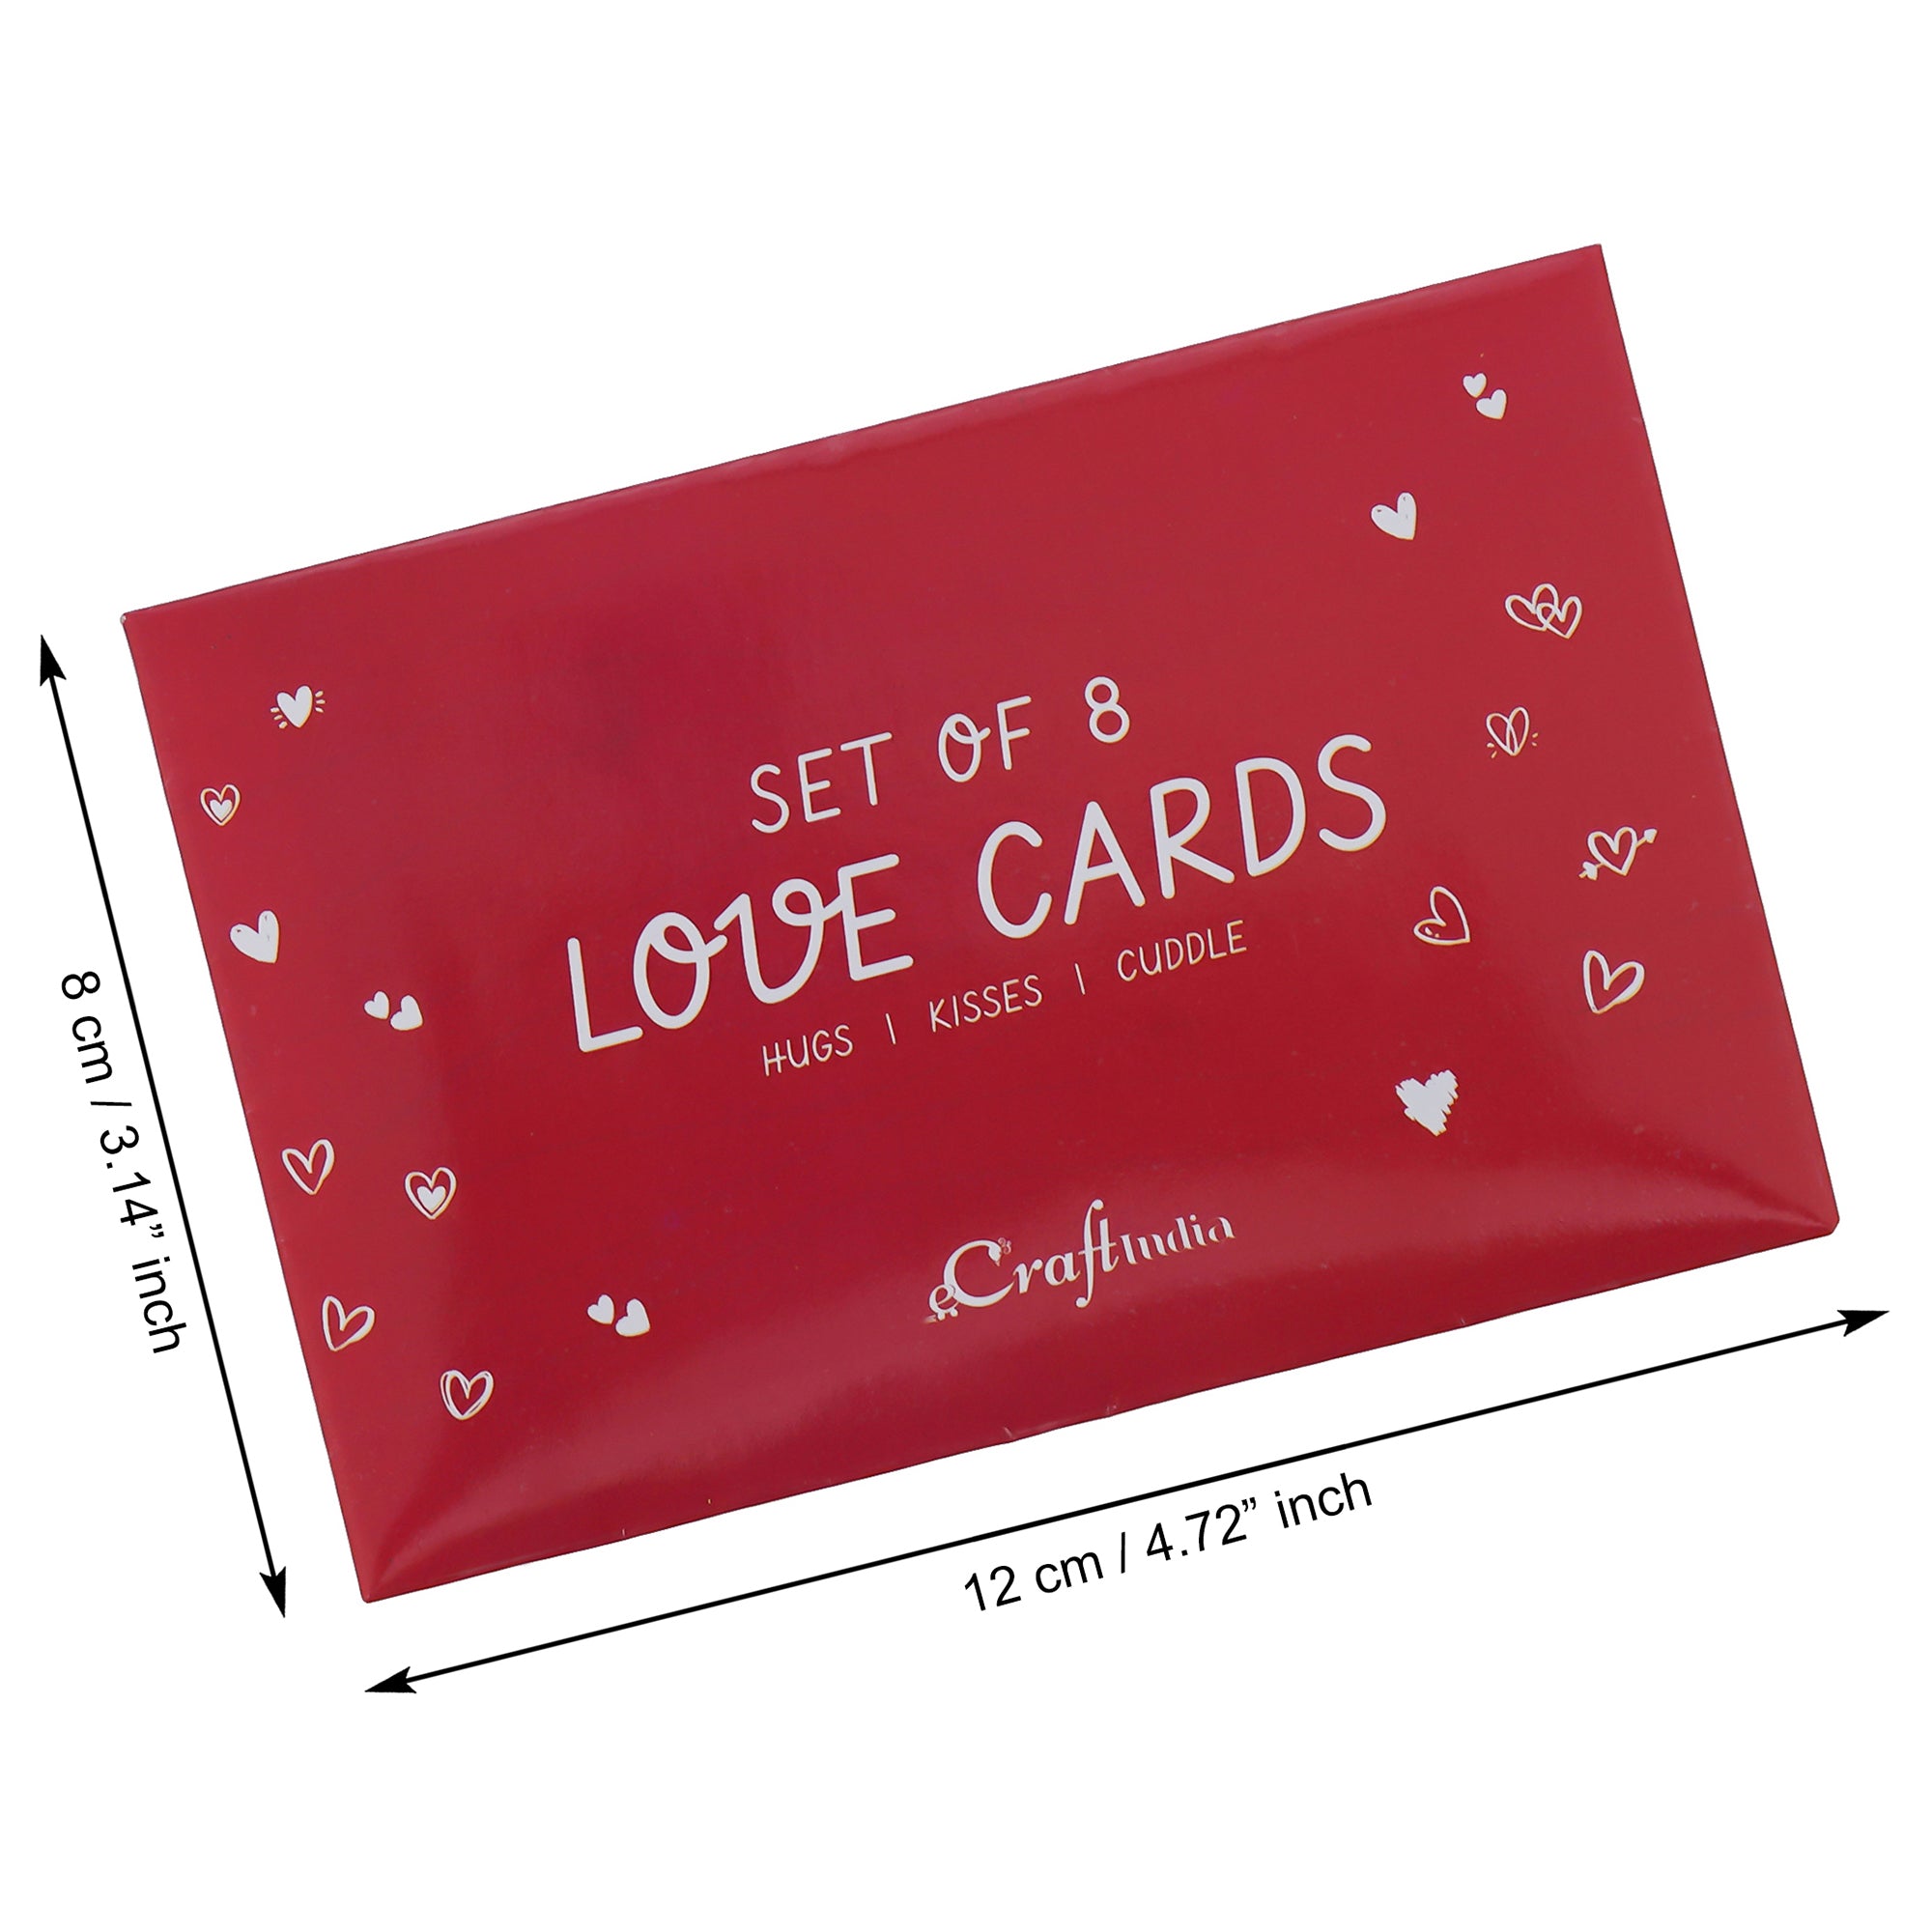 Valentine Combo of Pack of 8 Love Gift Cards, Golden Rose Gift Set, Hands Showcasing Red Heart Gift Set 2